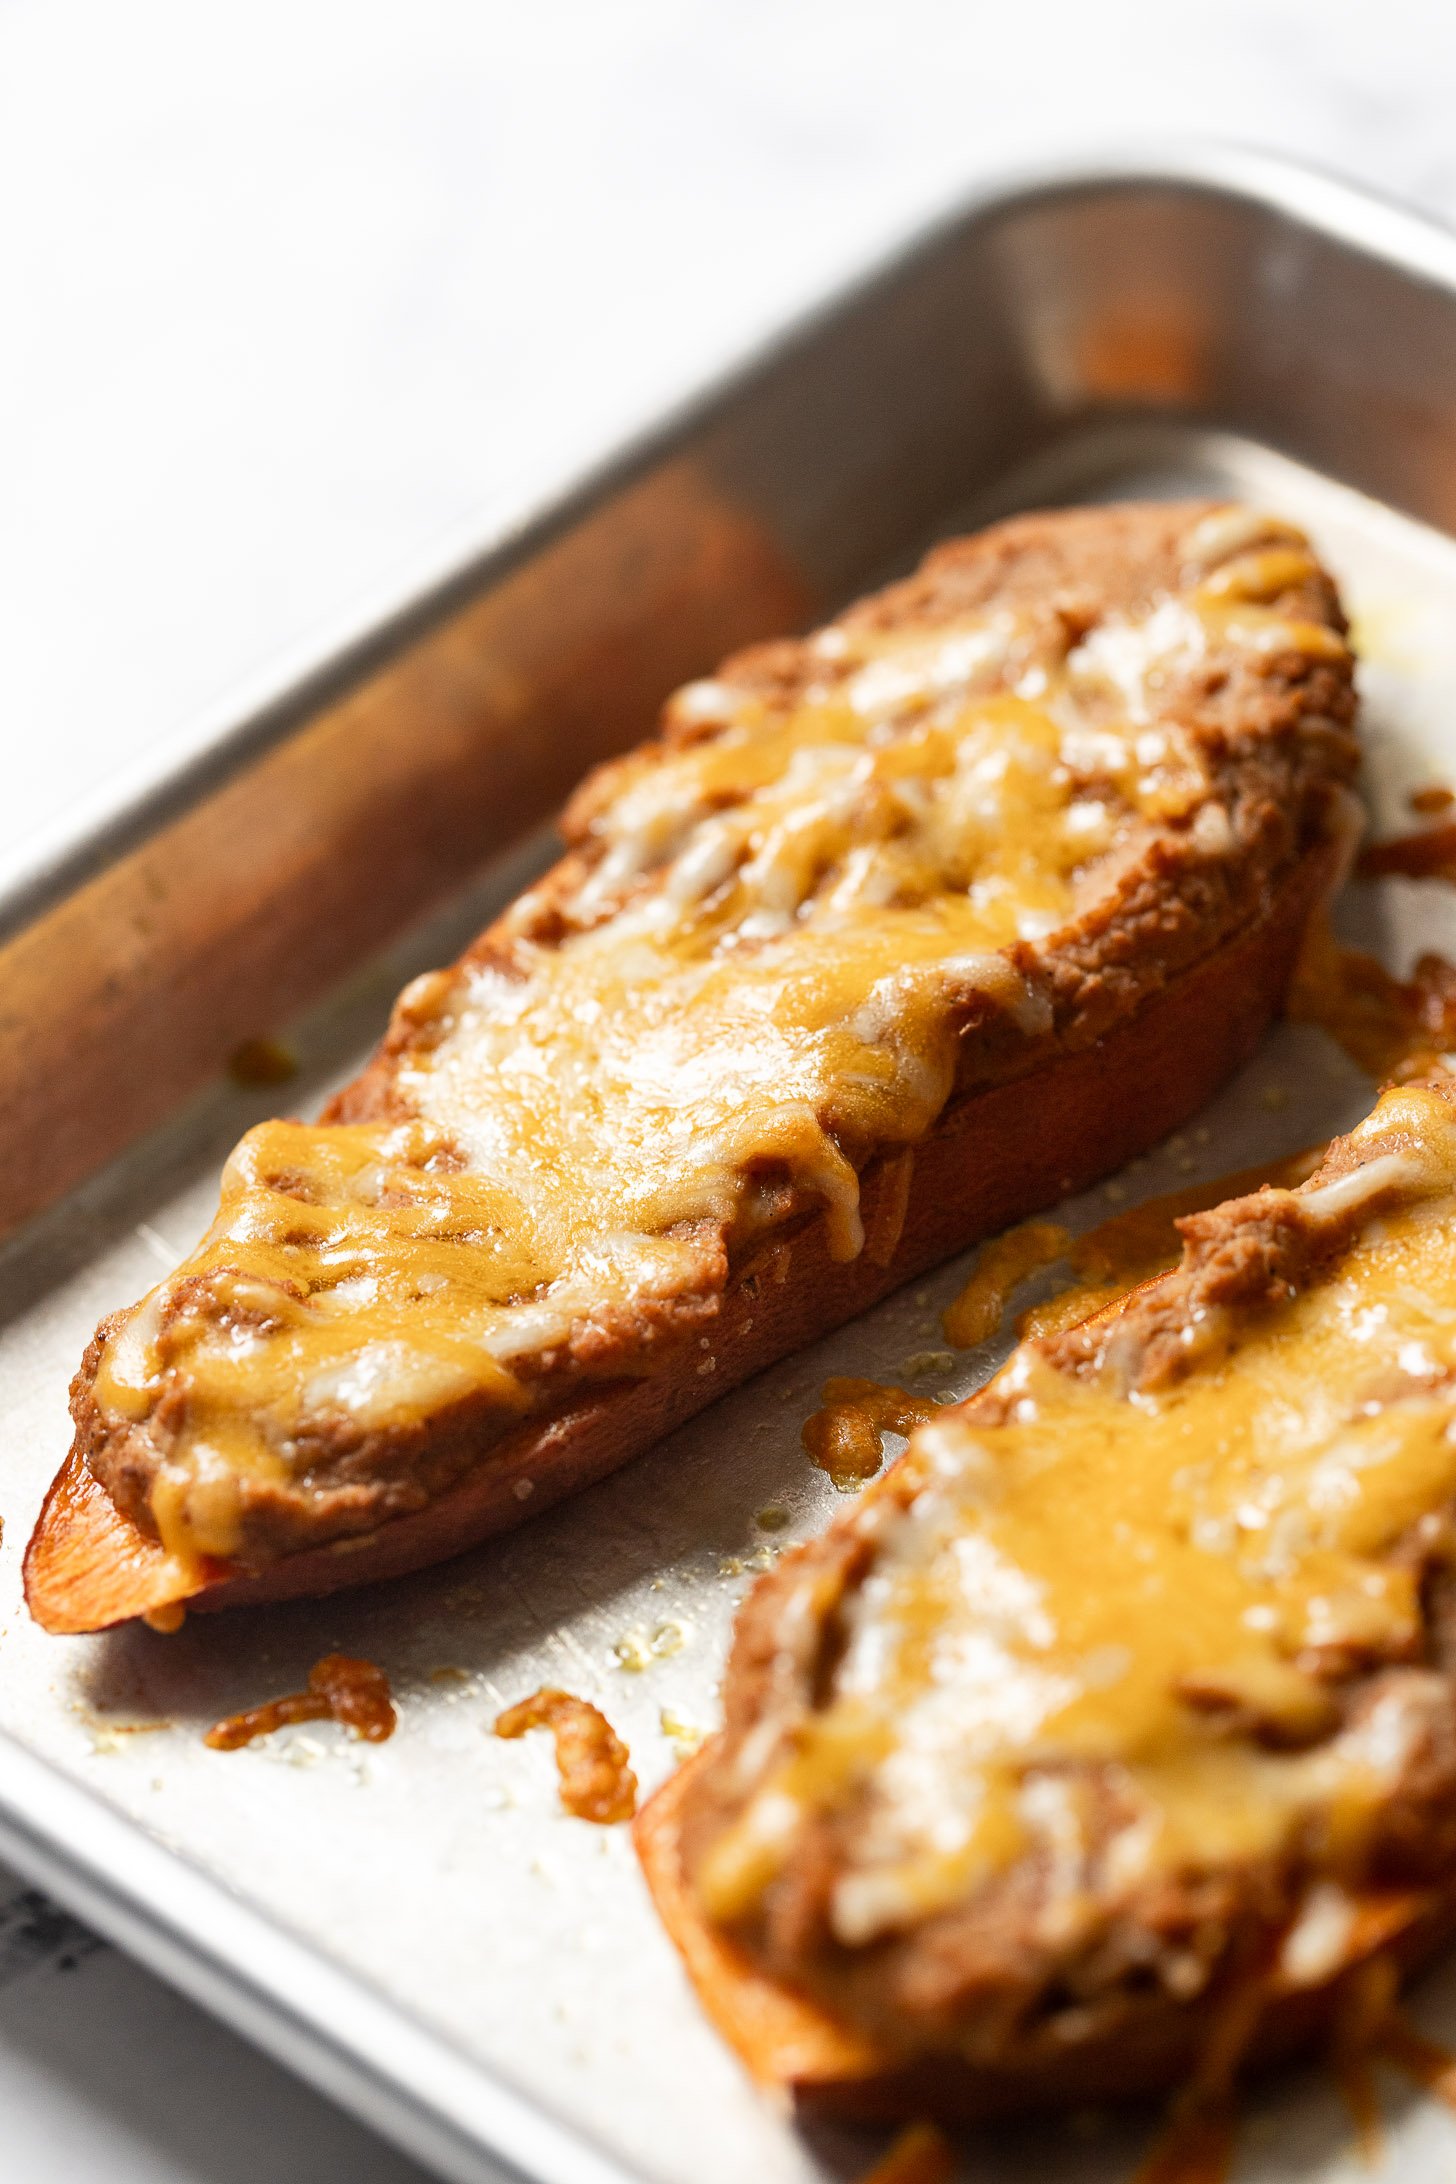 Sweet potato slice with melted cheese on top of beans.